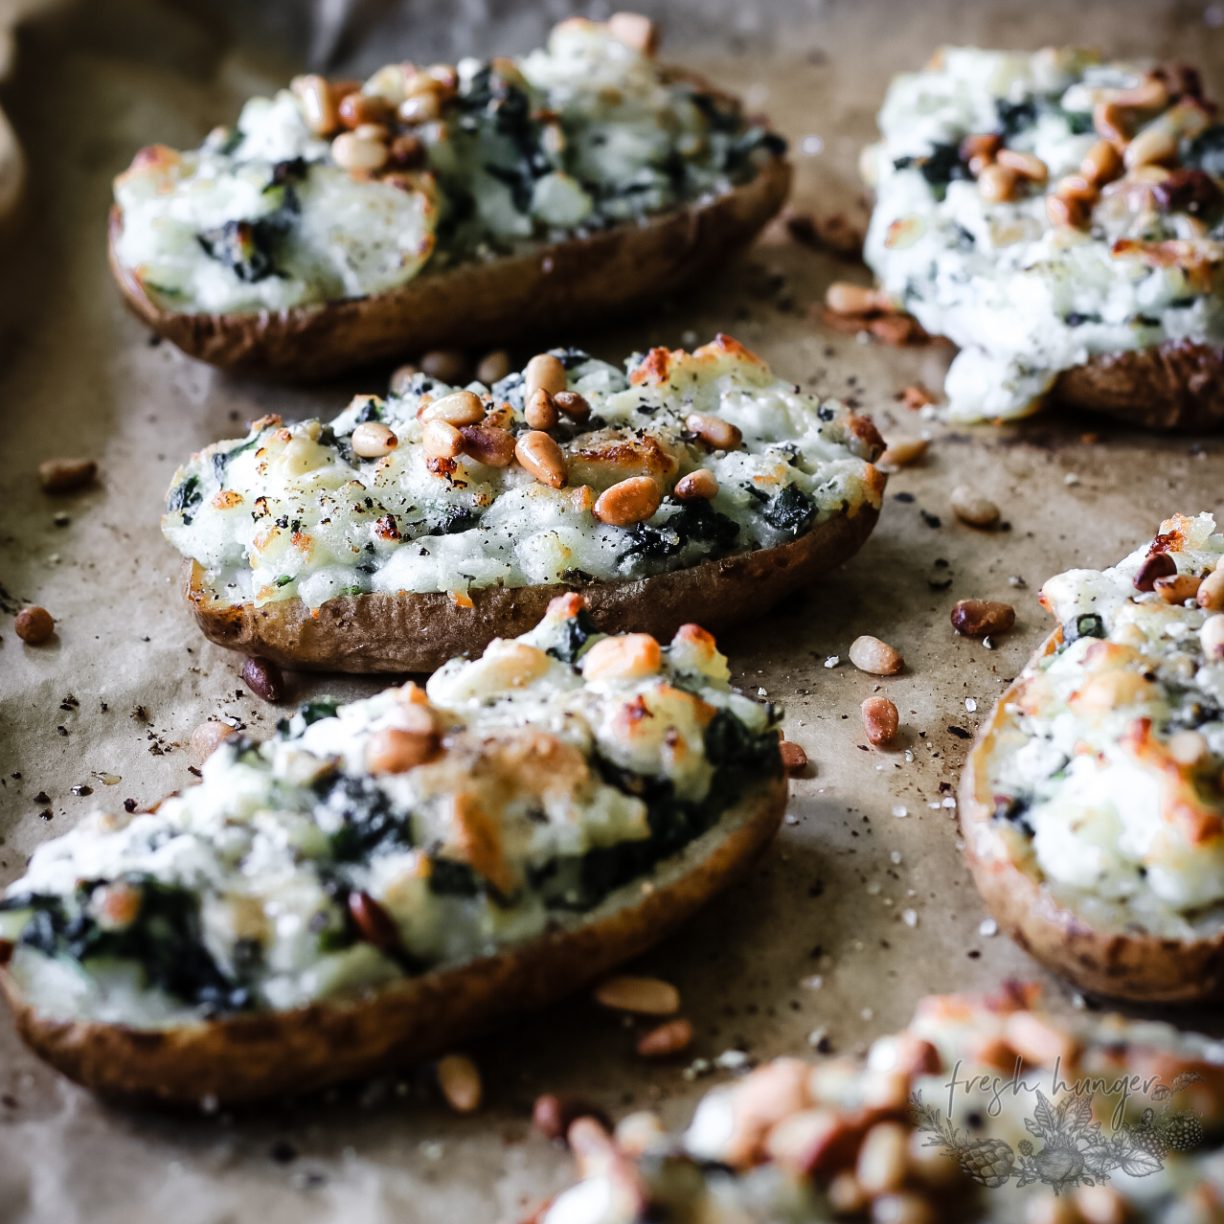 BLUE CHEESE & SPINACH STUFFED BAKED POTATOES